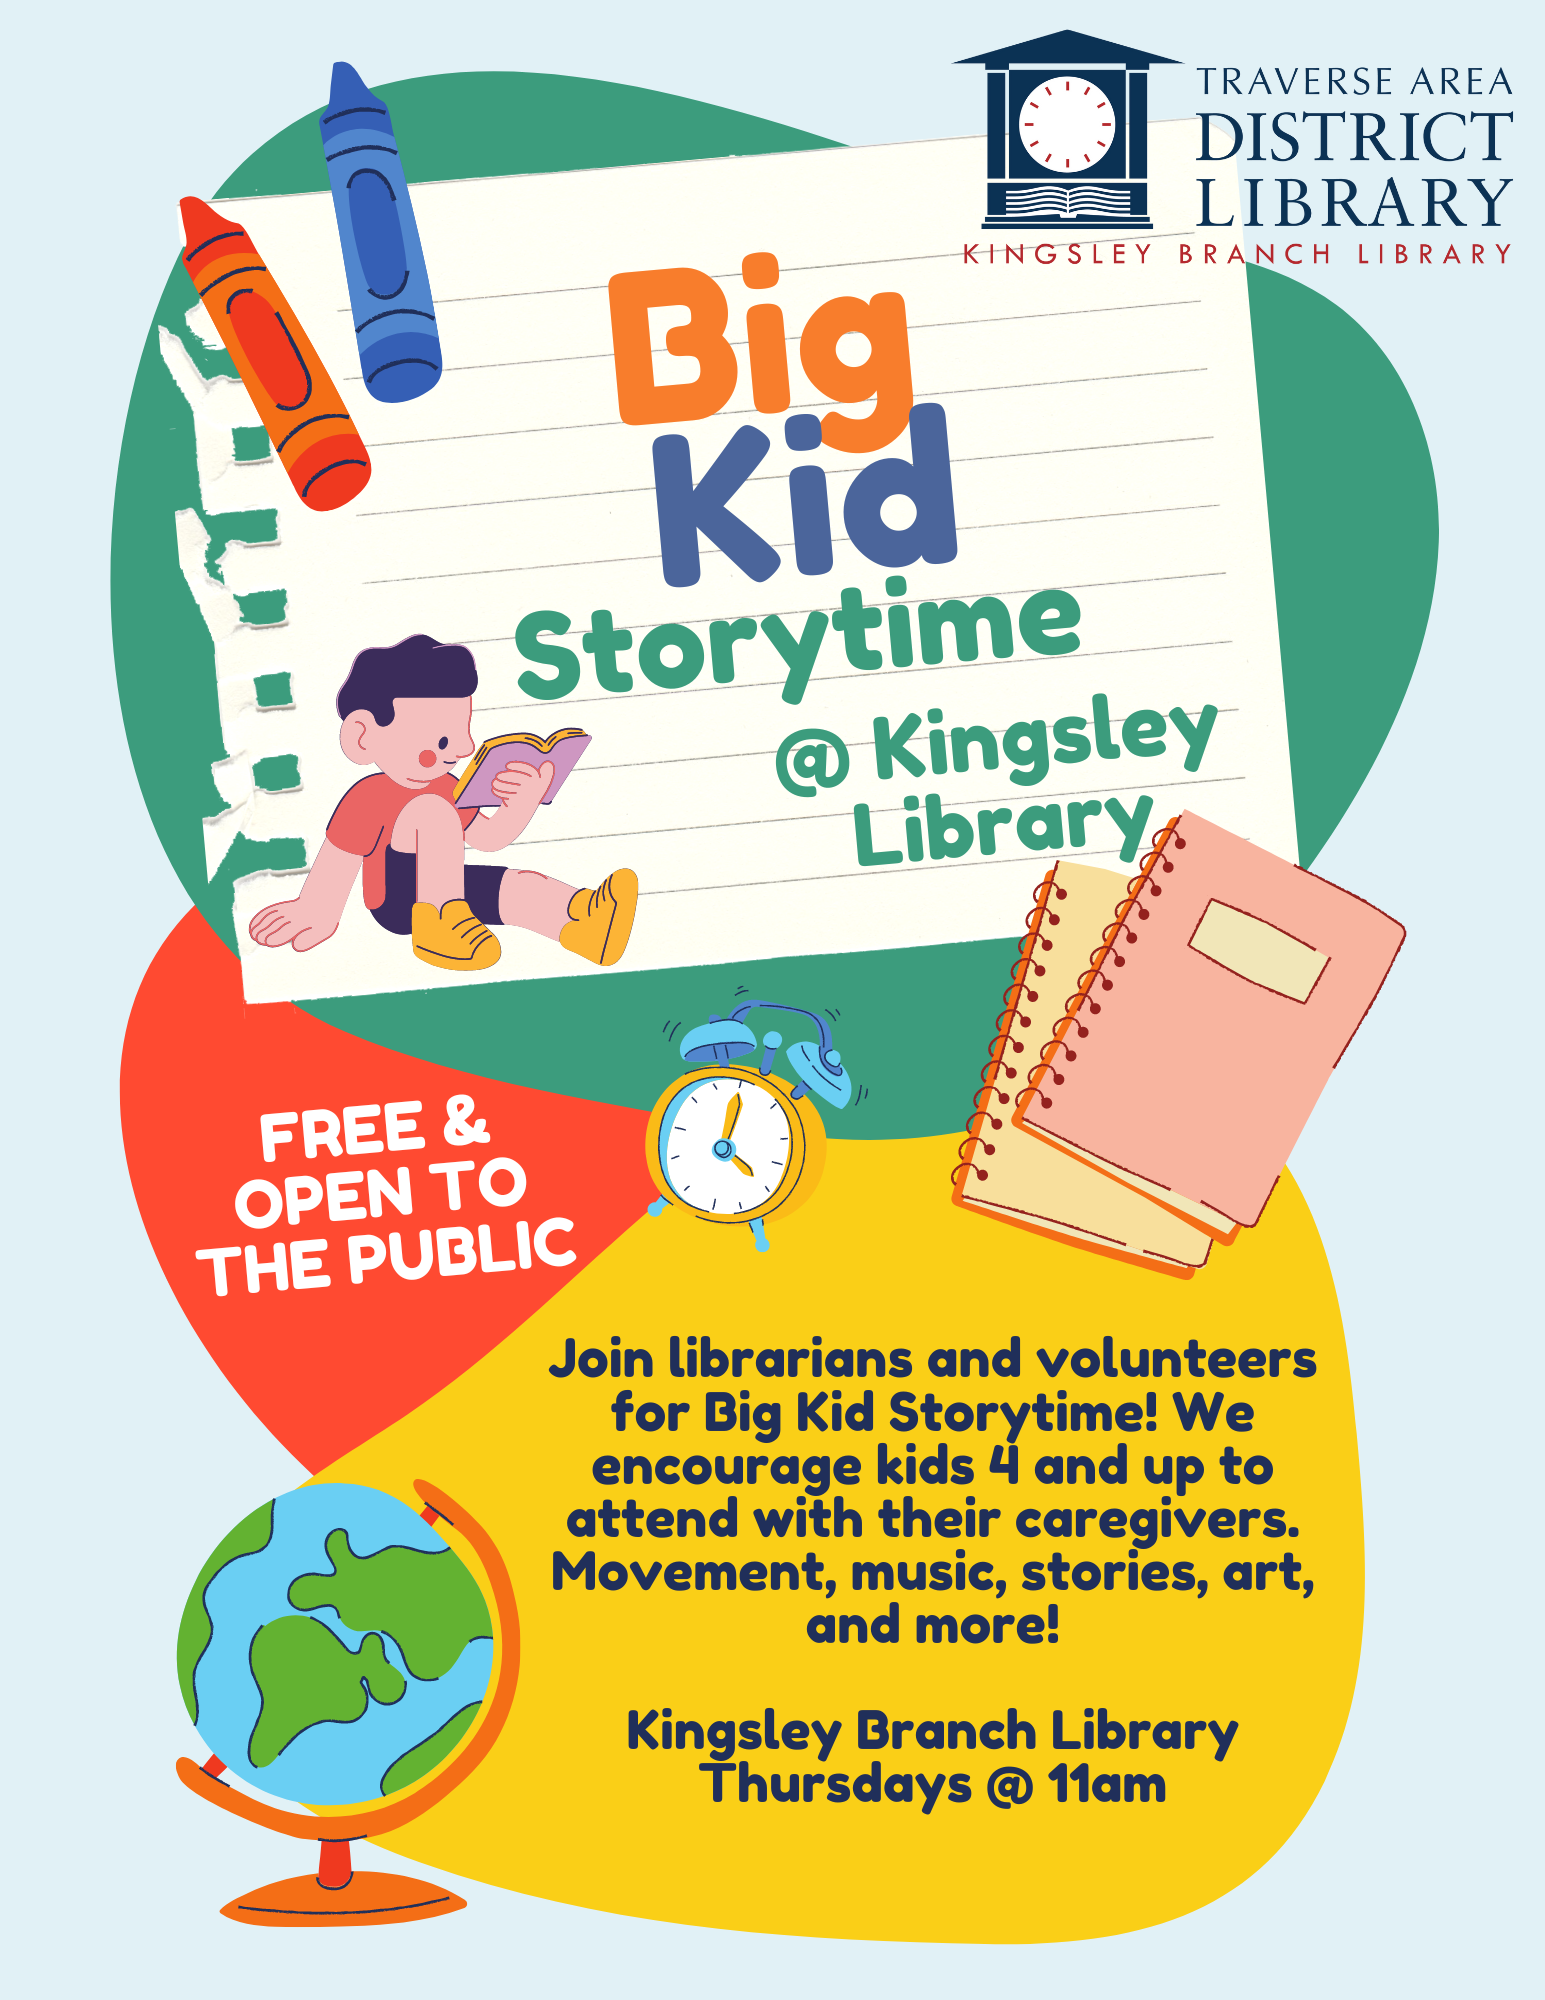 Image of little boy reading. Text says Big Kid Storytime at Kingsley Branch Library, Thursdays from 11am to 11:45am, free and open to the public.